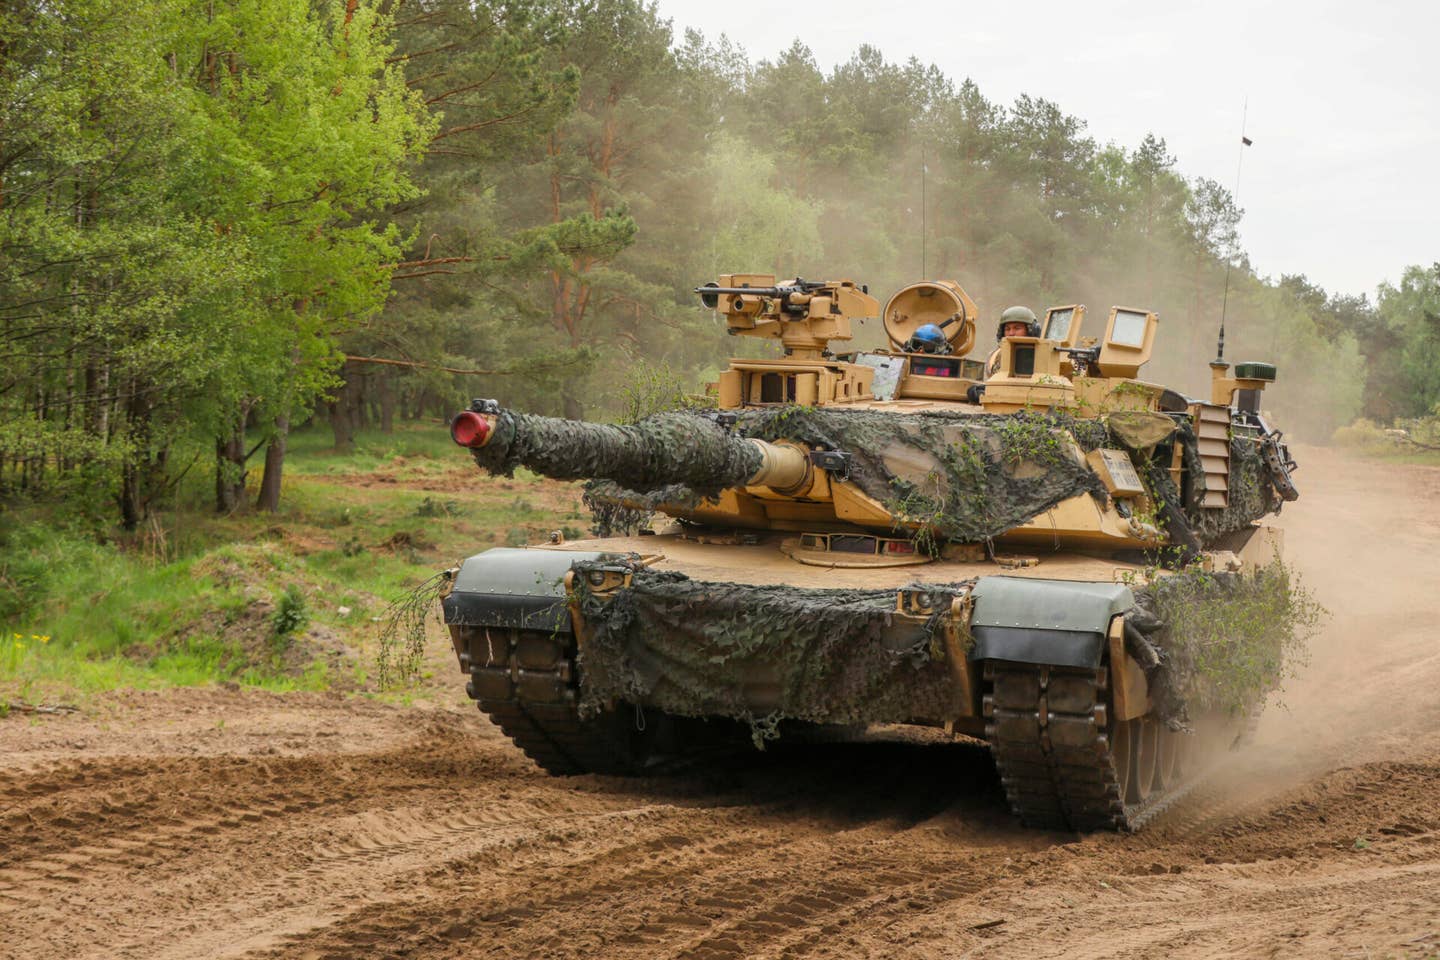 A U.S. Army M1A2 Abrams tank assigned to the 3rd Armored Brigade Combat Team, 4th Infantry Division, moves to their fighting positions during a multinational field exercise during Defender Europe 2022, Drawsko Pomorskie, Poland, May 15, 2022. (U.S. Army photo by Sgt. Andrew Greenwood)